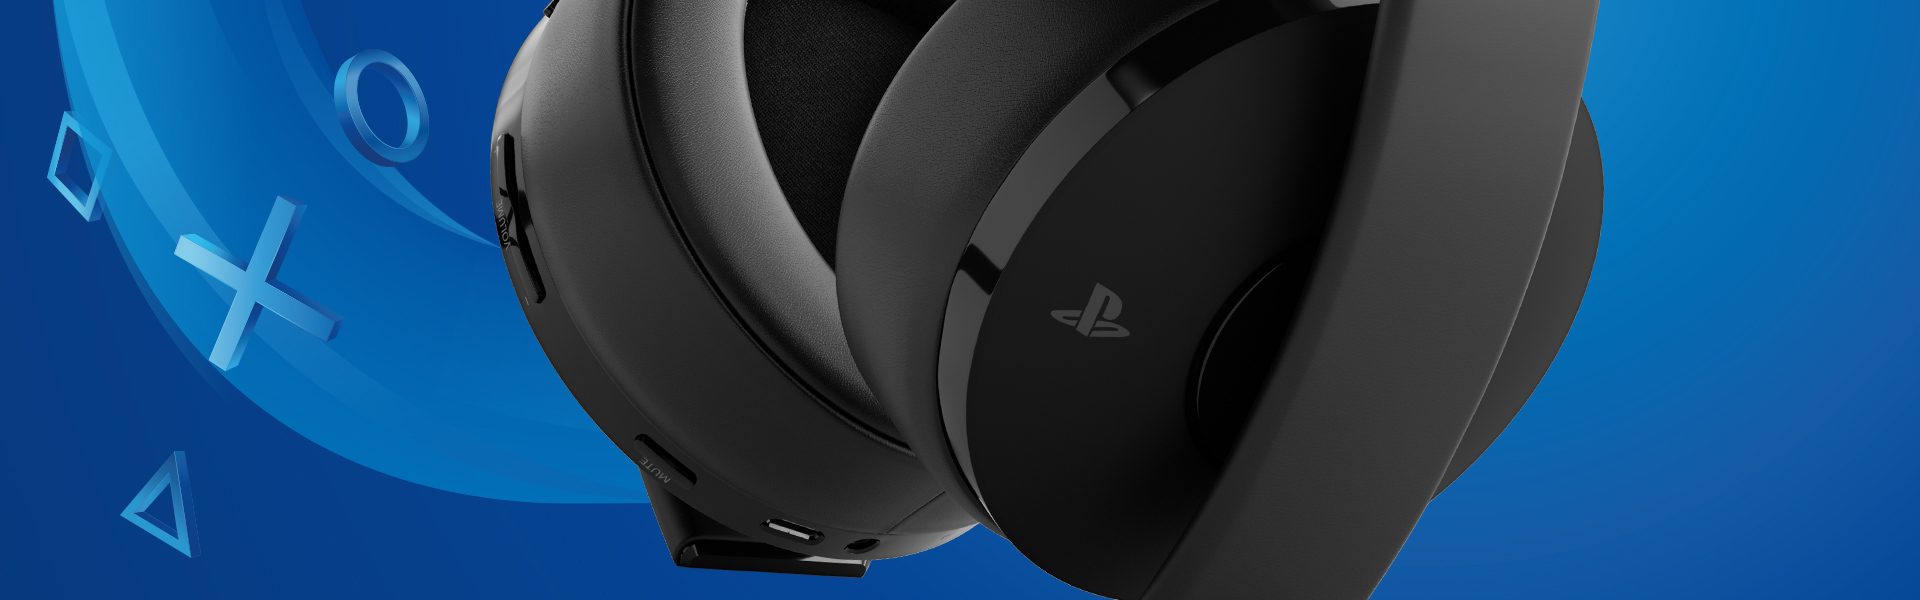 ps4 gold headset lost usb